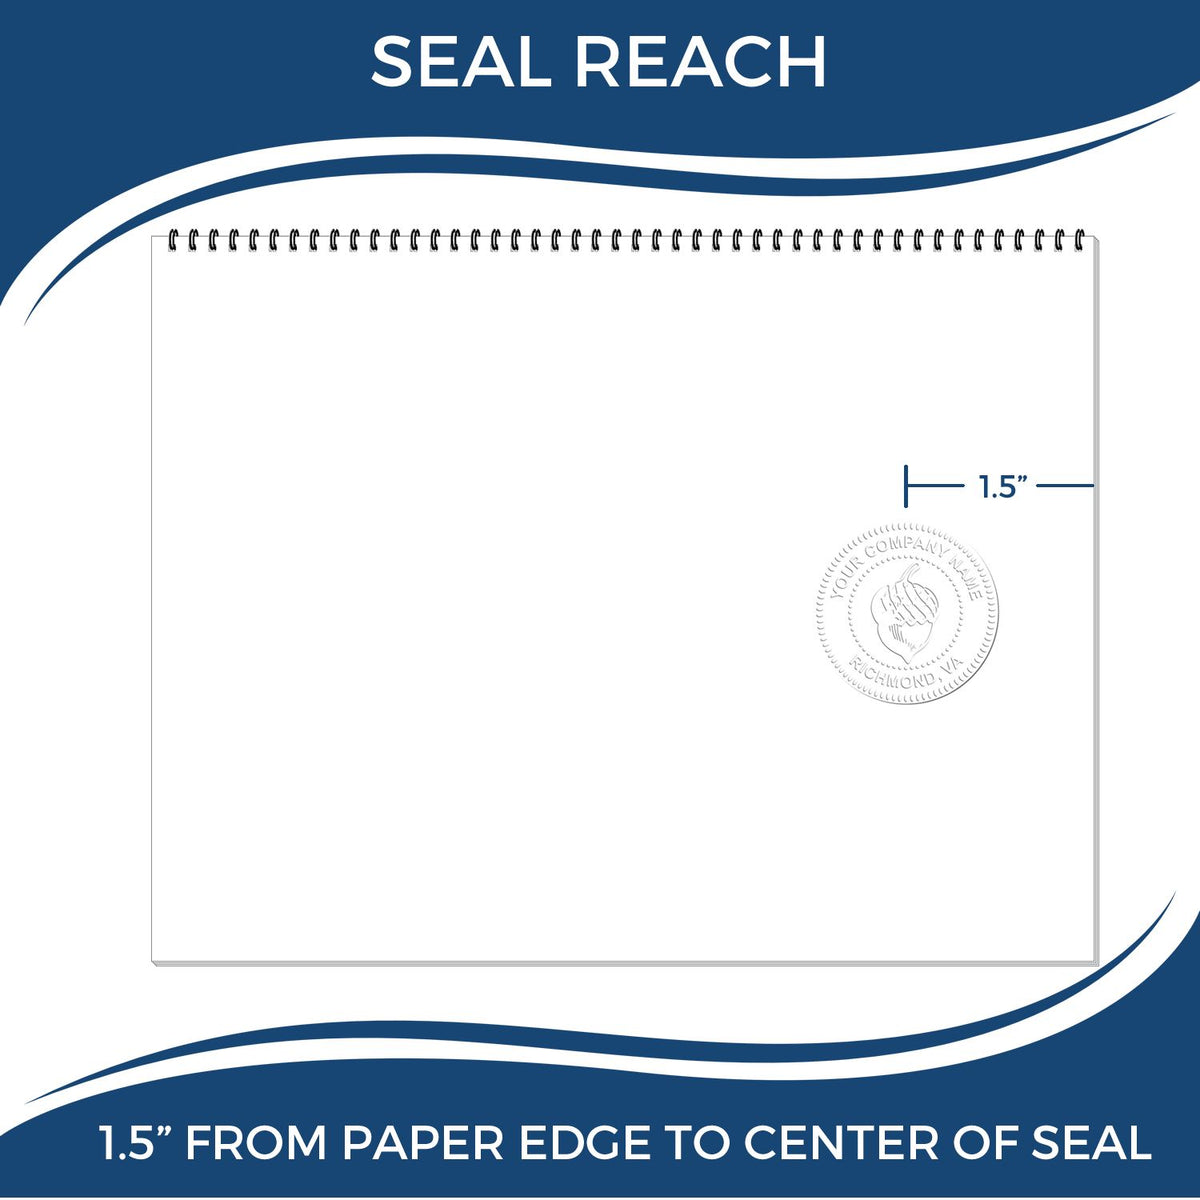 An infographic showing the seal reach which is represented by a ruler and a miniature seal image of the State of Michigan Soft Land Surveyor Embossing Seal